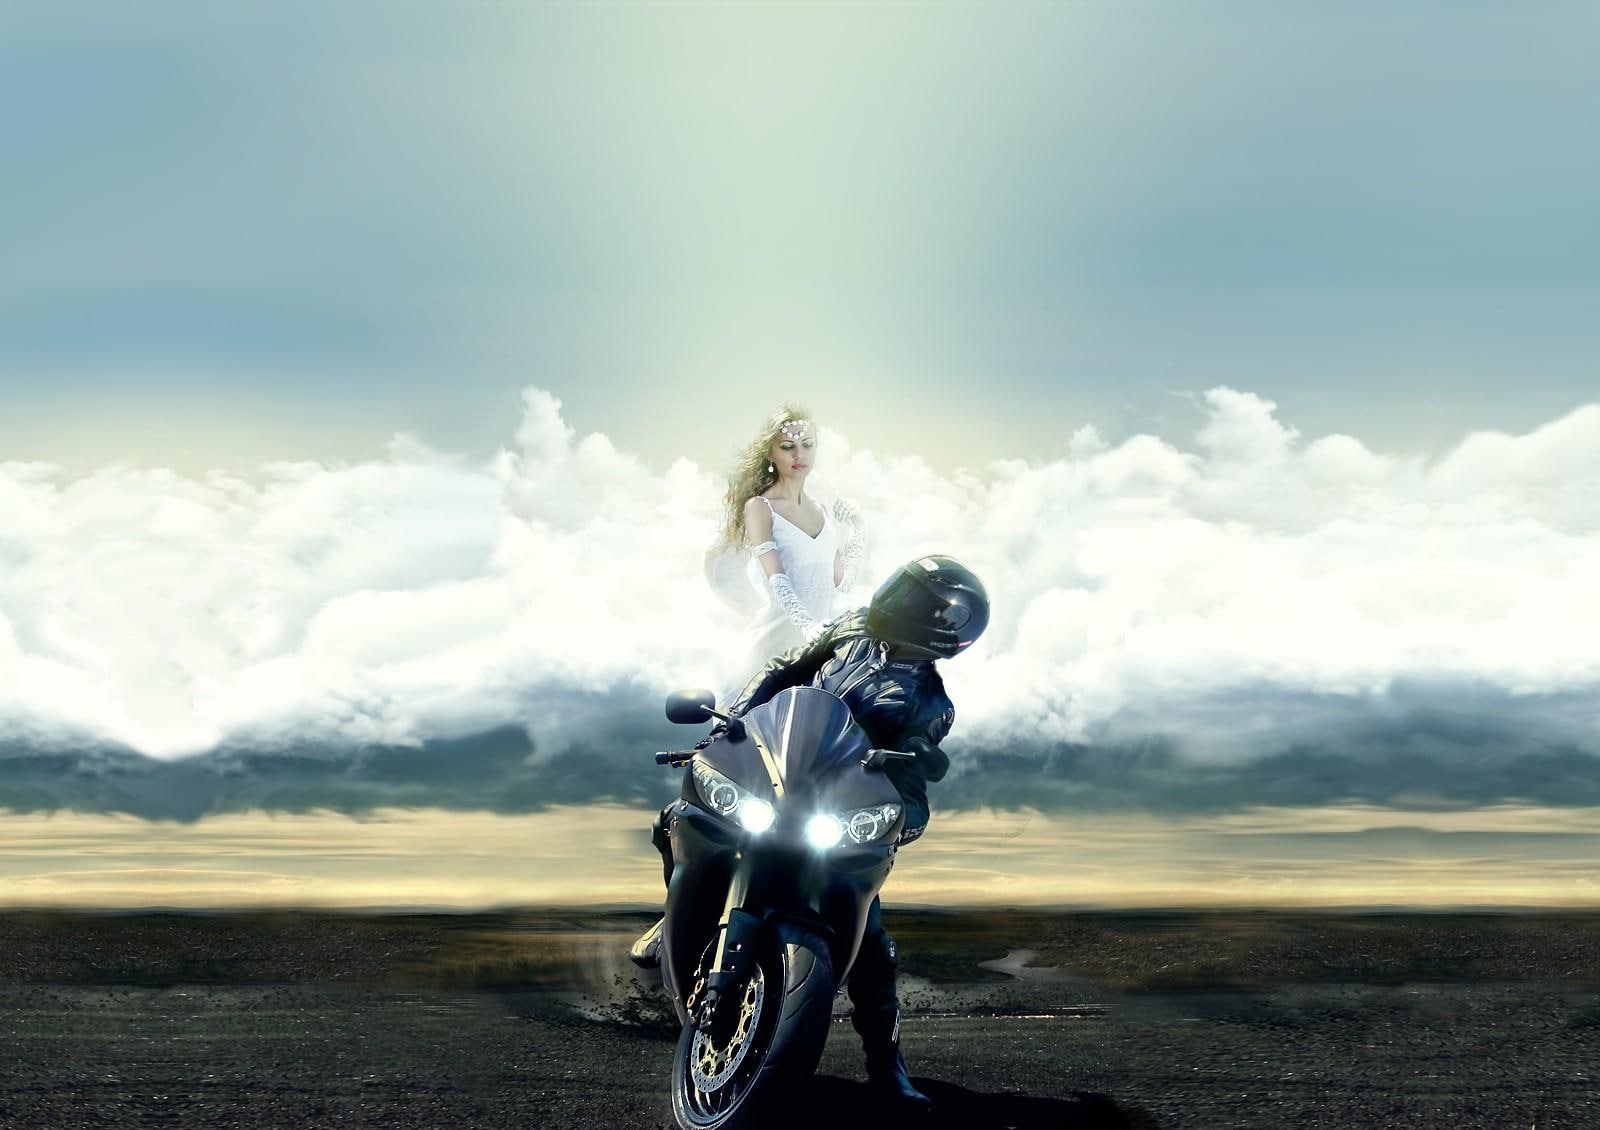 Motorcyclist, Guardian Angel, Clouds